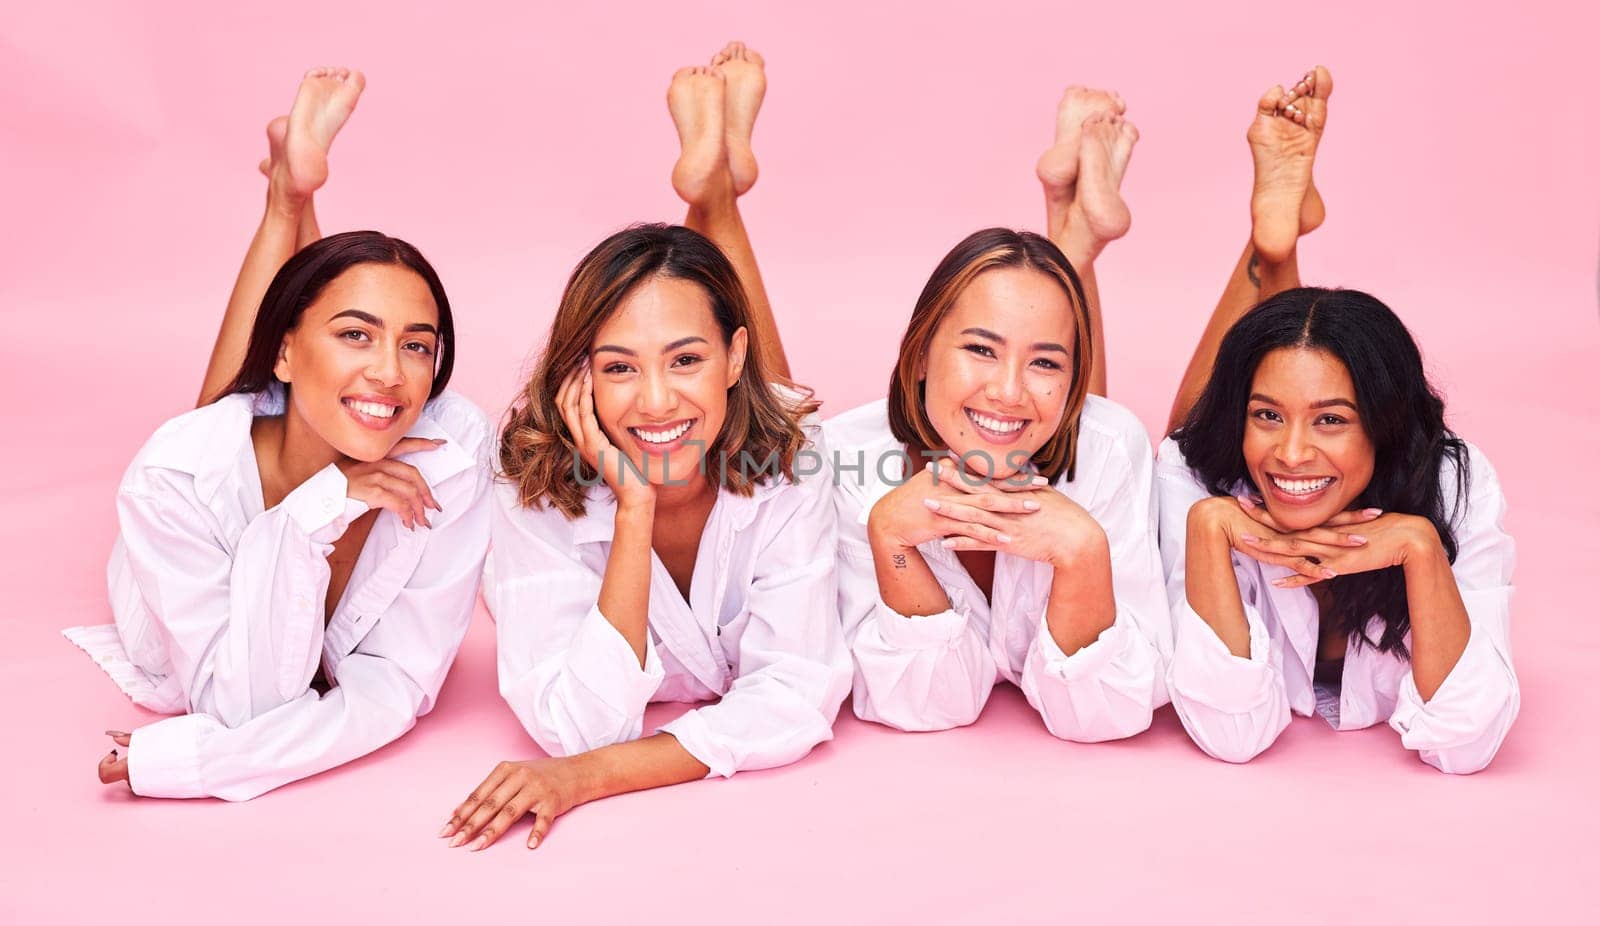 Portrait, smile and lingerie with model friends on a pink background in studio for natural skincare. Diversity, beauty and wellness with a group of women posing for health, inclusion or cosmetics.